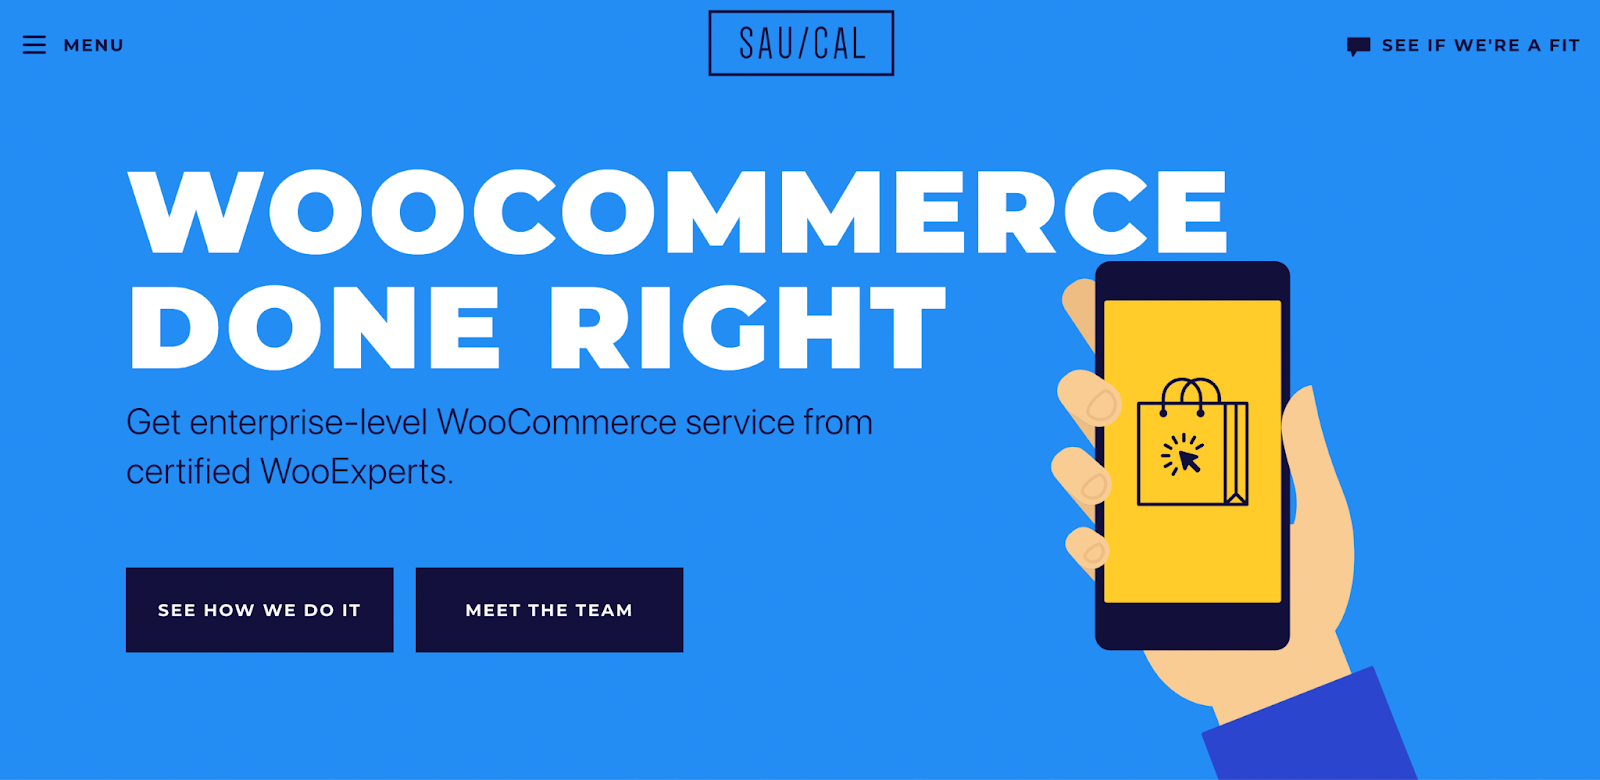 Saucal for wordpress outsourcing